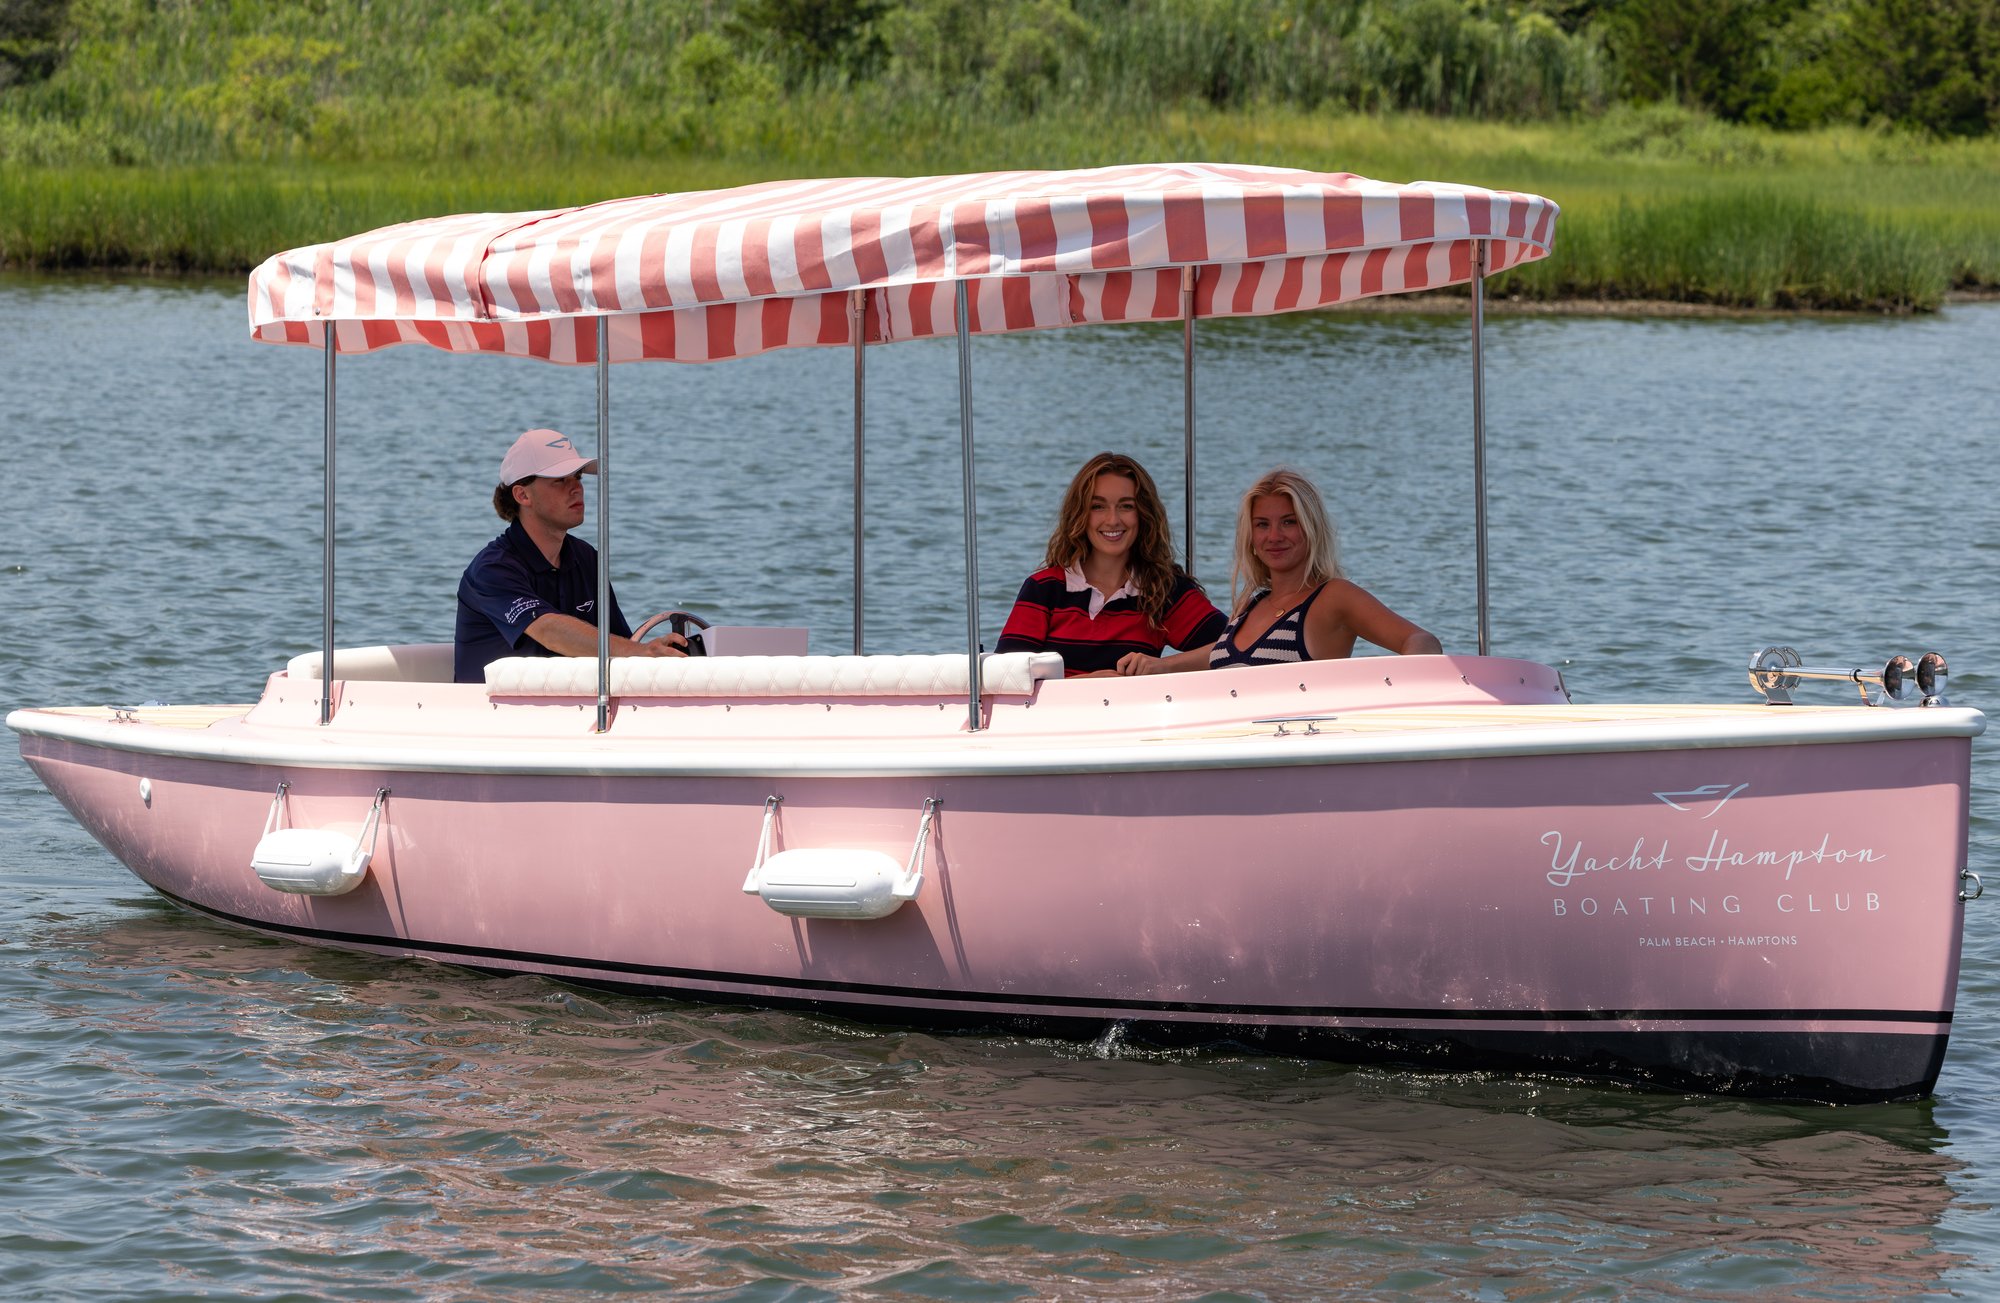 Electric Boats | Sustainable Boating | Eco-Friendly Yachts